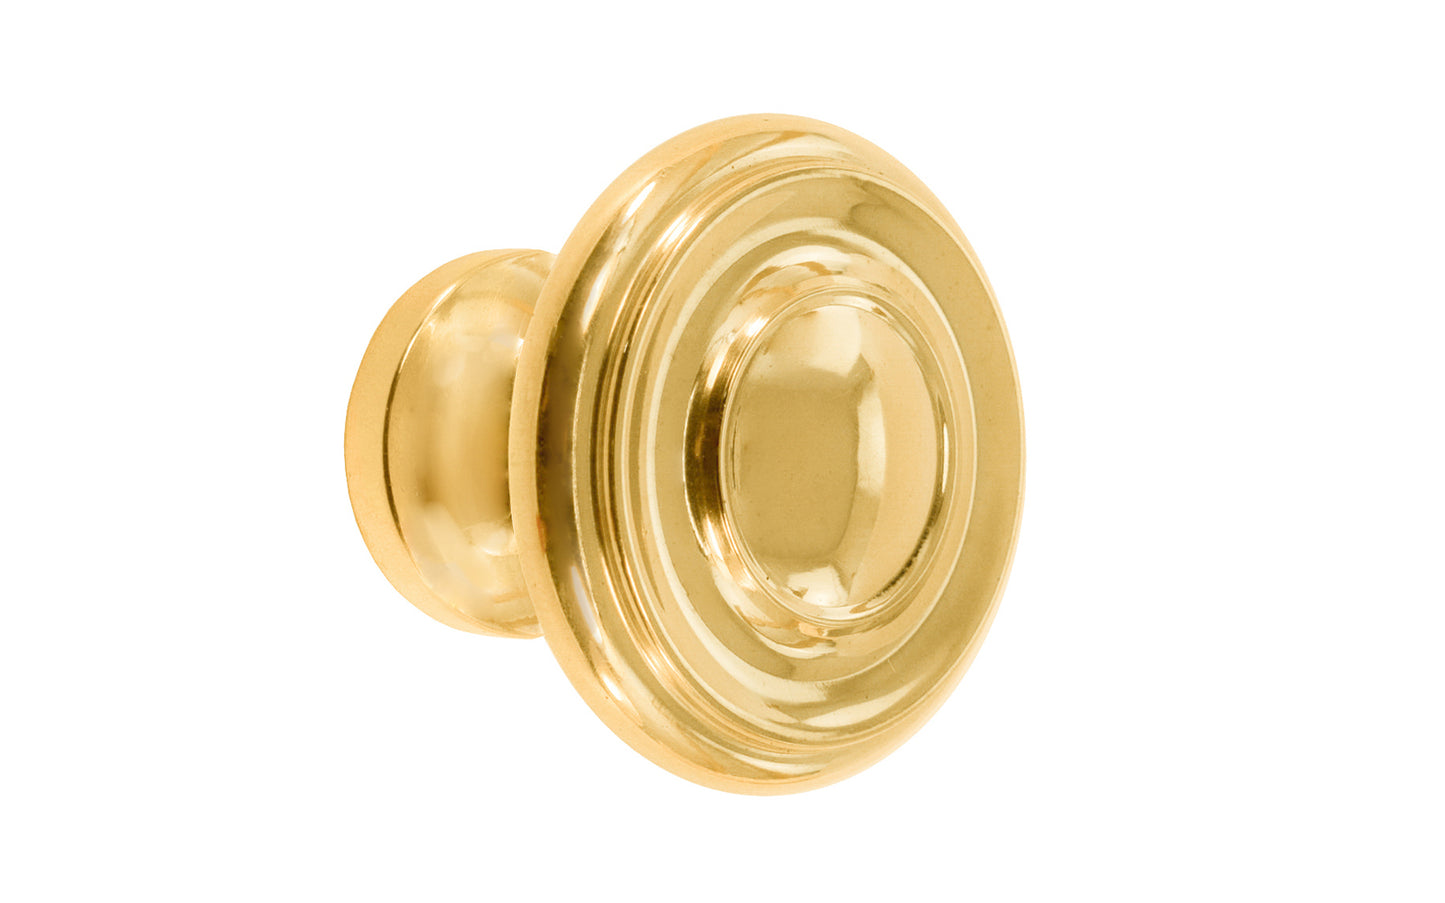 Vintage-style Hardware · Solid Brass classic contemporary / art deco, mid-century style cabinet knob. High quality solid brass 1-1/4" diameter Knob. Ideal for kitchen & bathroom cabinets, & furniture. Unlacquered Brass (the non-lacquered brass will patina over time). Un-lacquered brass.